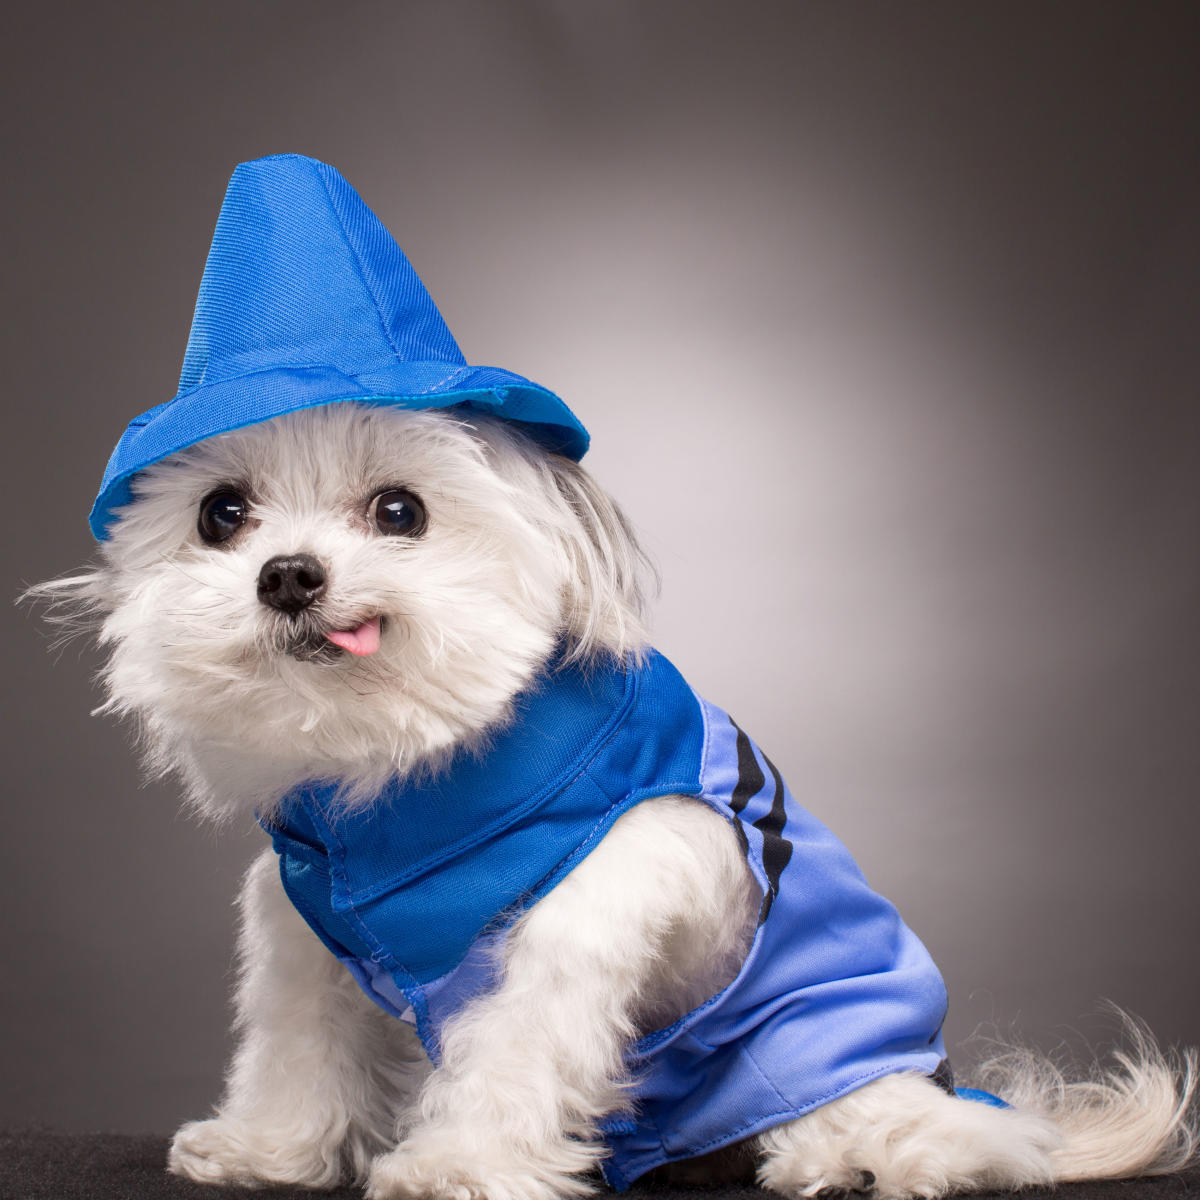 6 Photos of Norbert the Therapy Dog That Prove He Is the Most Adorable